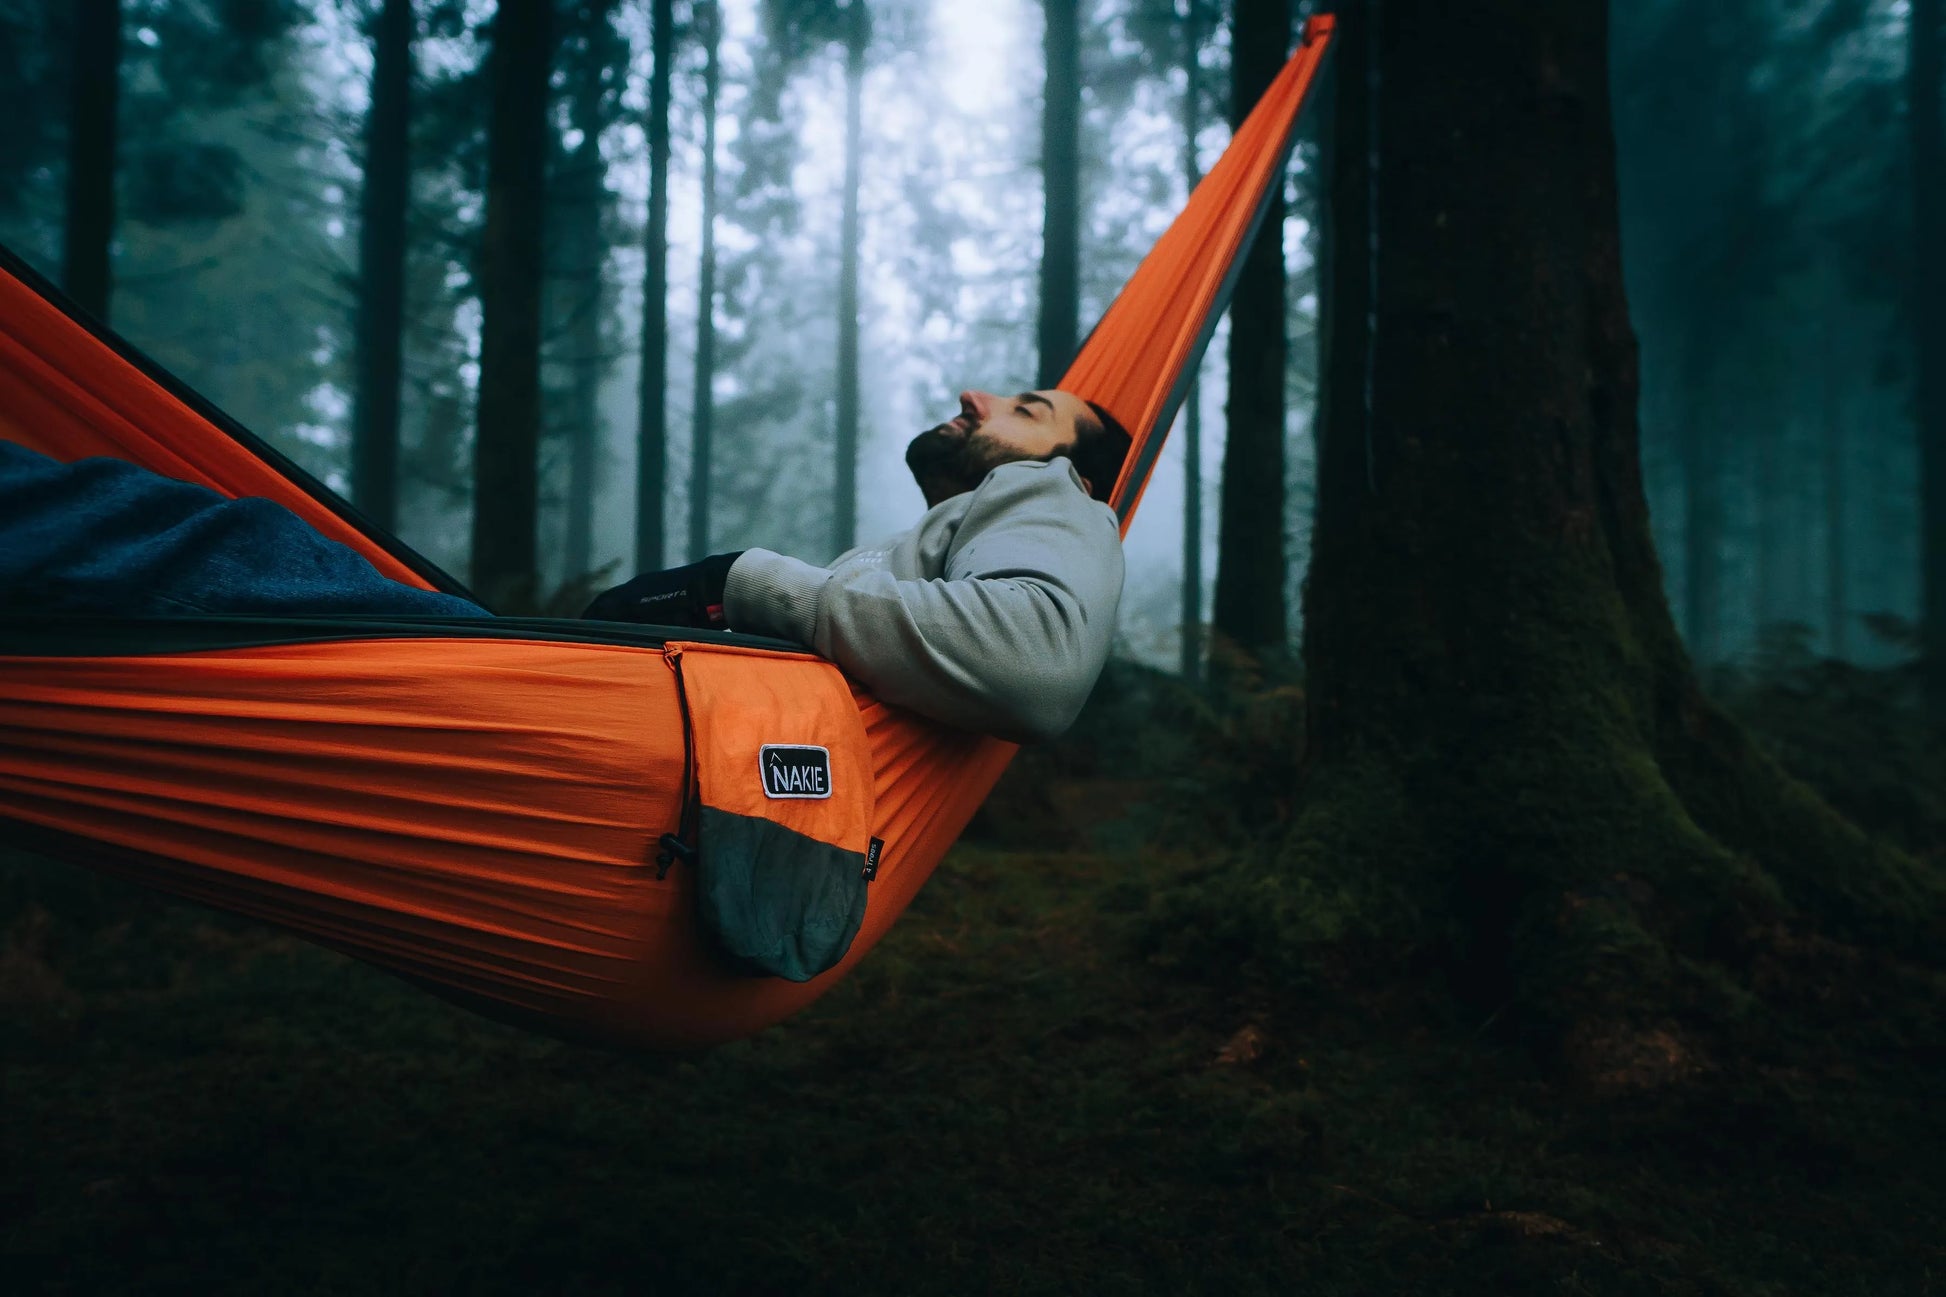 Man sleeping in a orange and gray hammock in the forest.